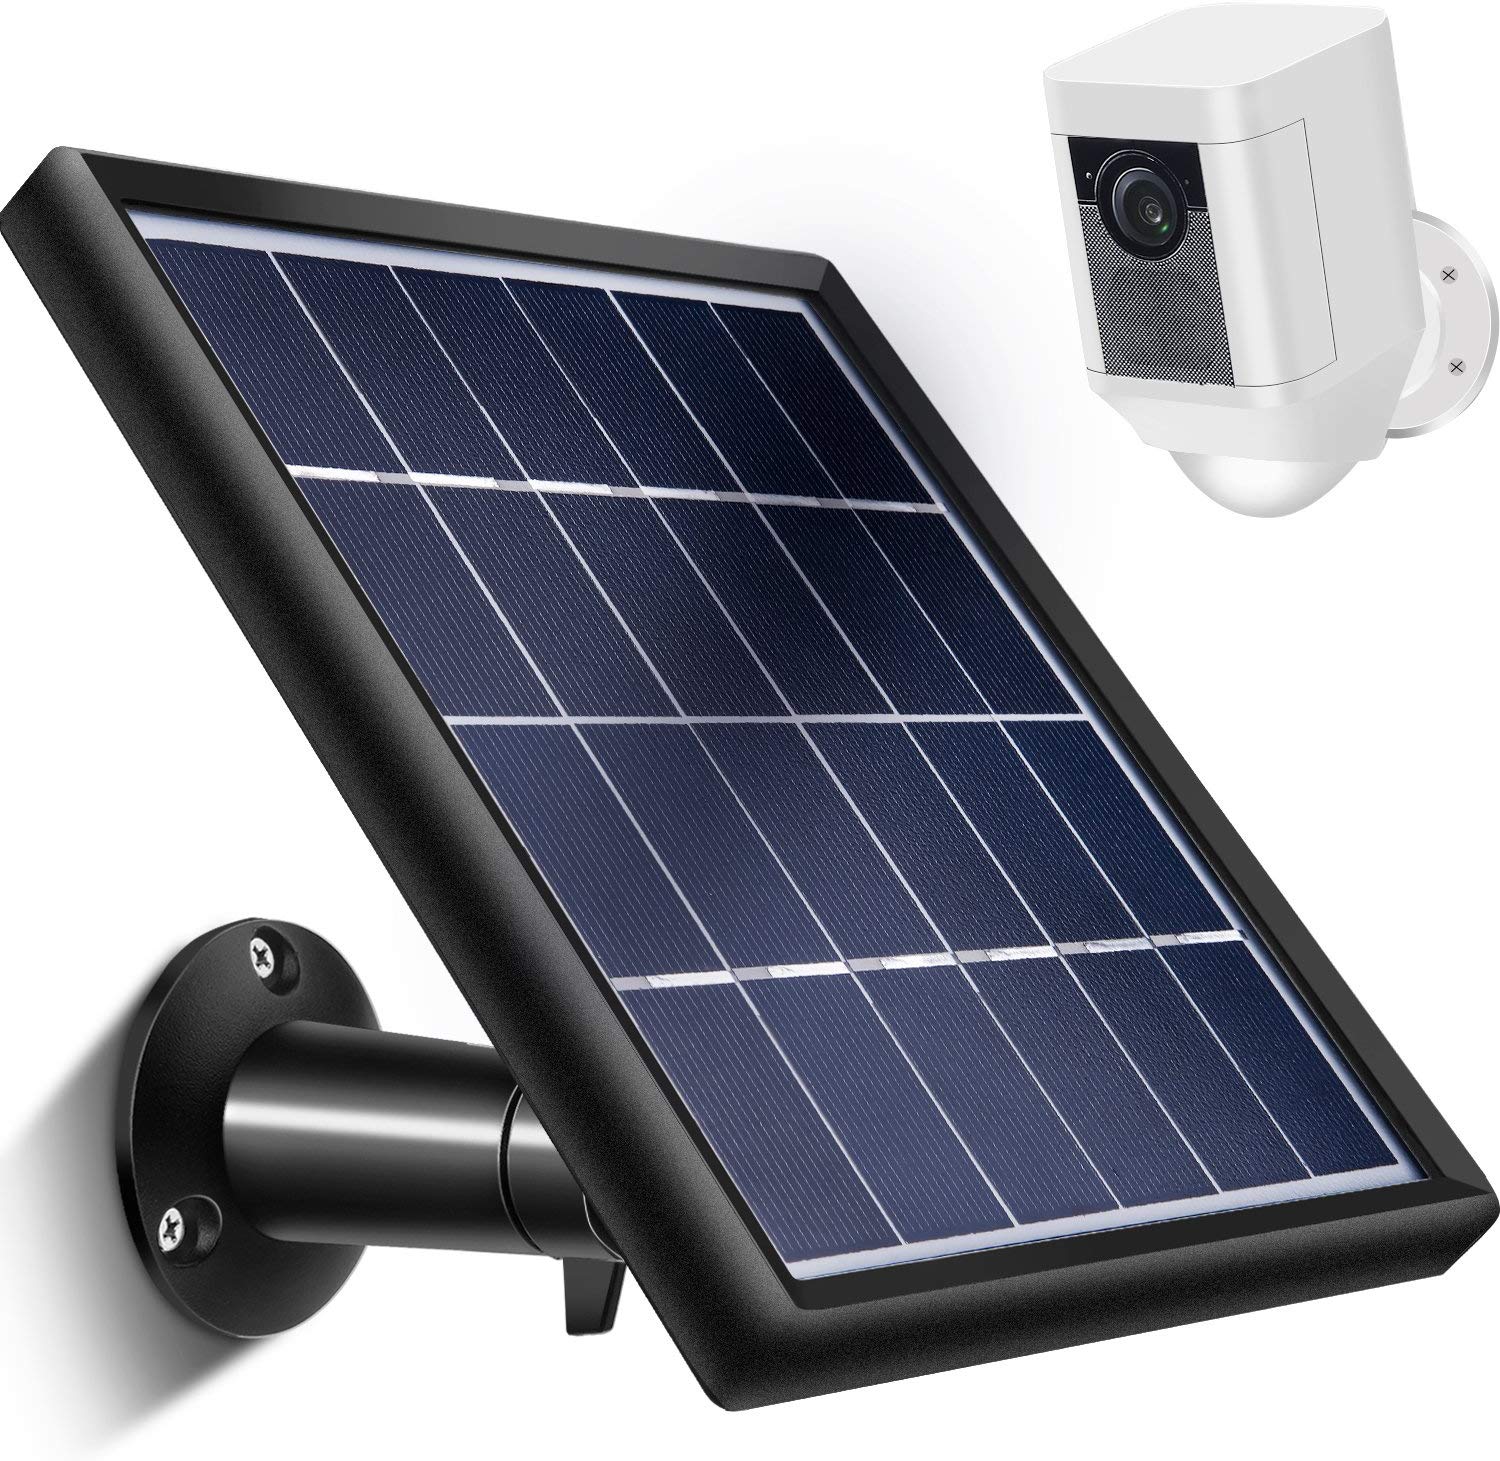 Skylety Solar Panel for Ring Spotlight Cam with Security Wall Mount